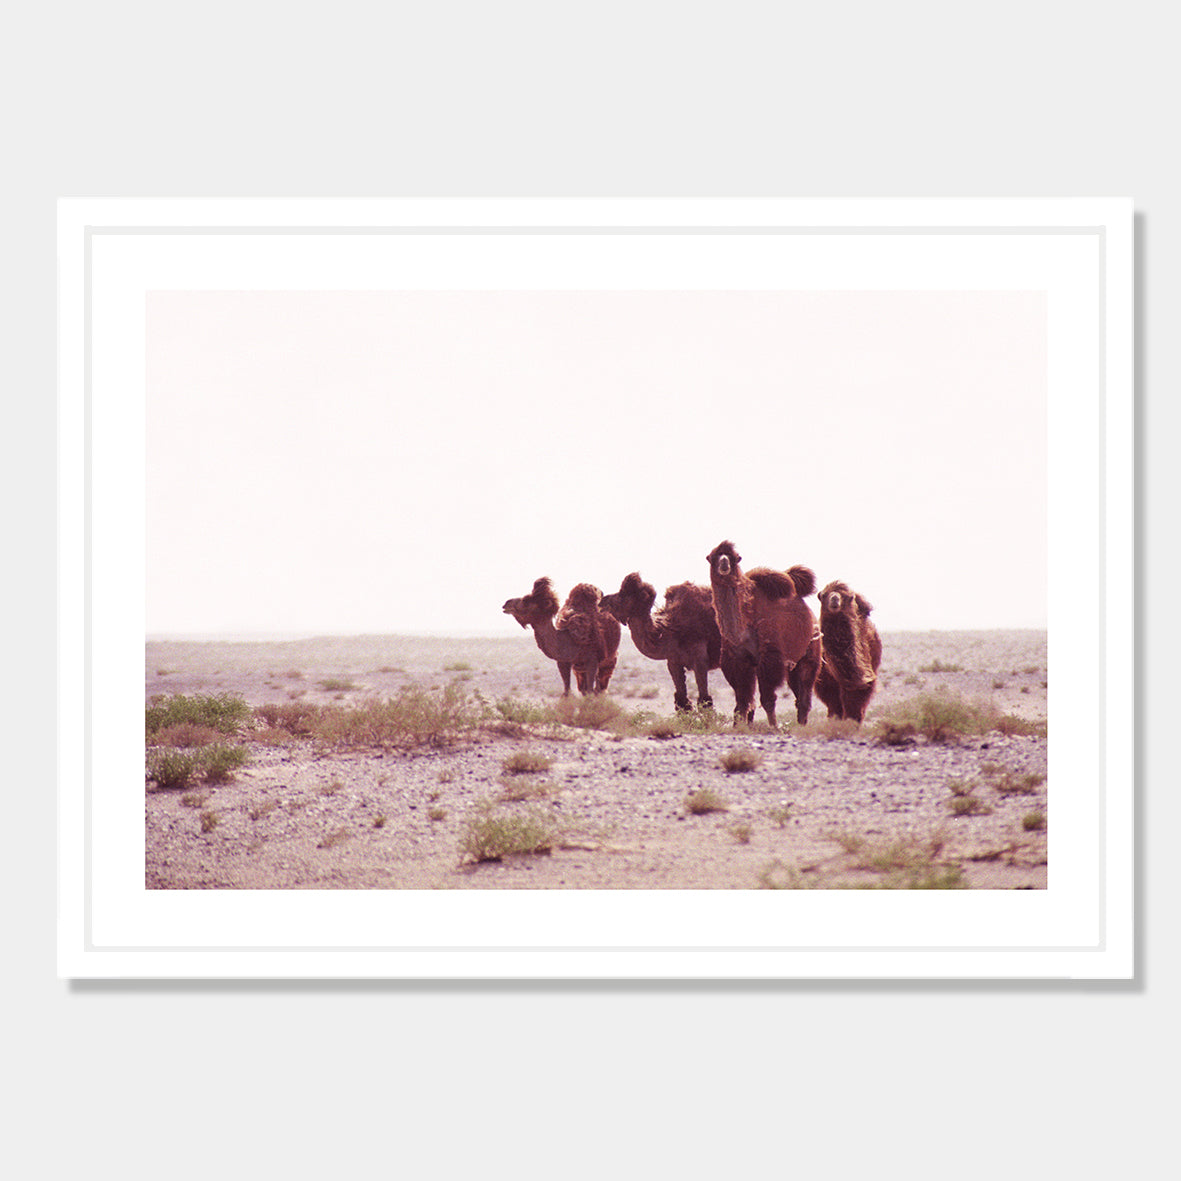 Photographic art print of Camels in the Gobi Desert, China by Bon Jung. Printed in New Zealand by endemicworld framed in white.